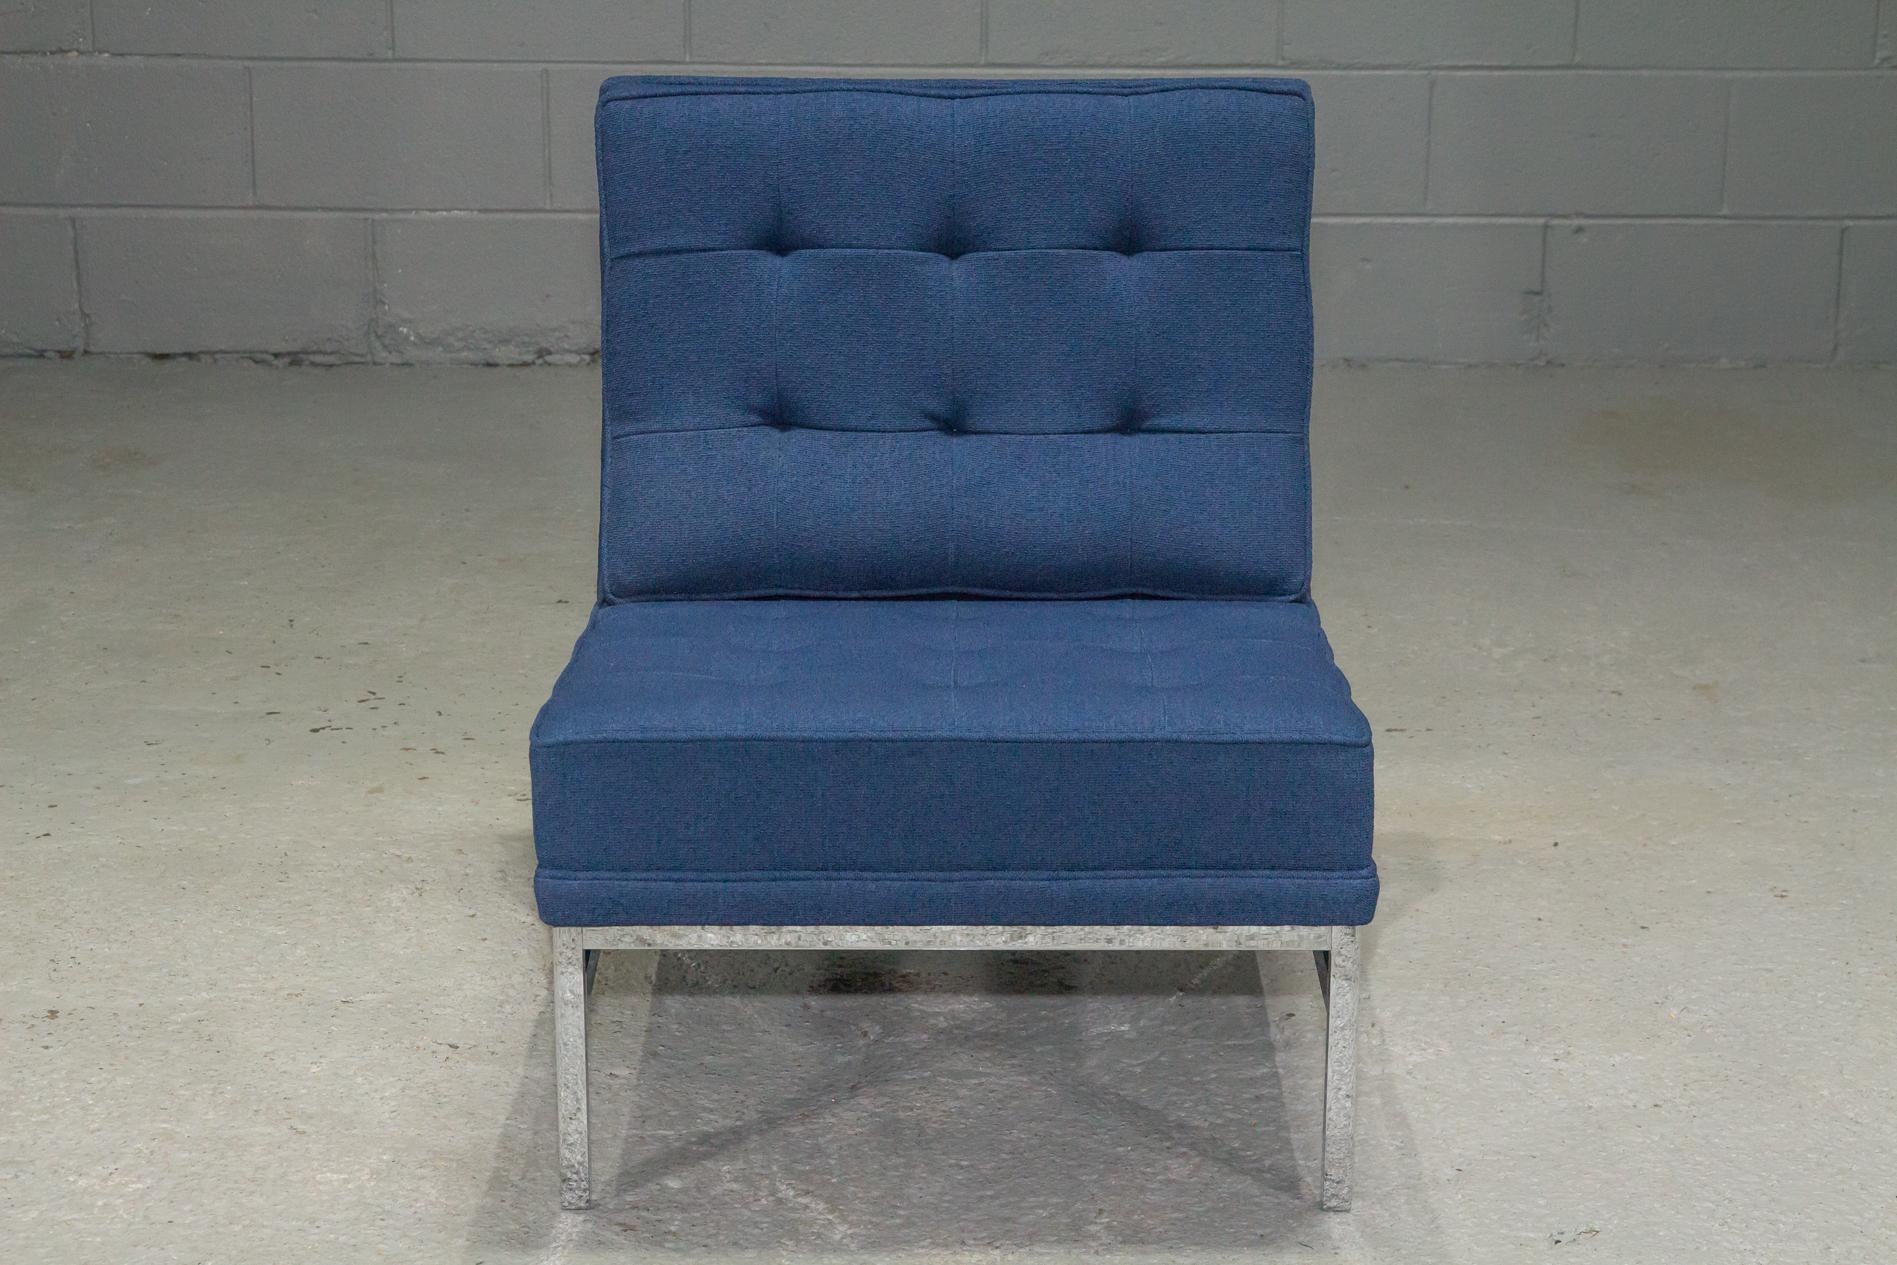 Armless lounge chair by Florence Knoll upholstered in blue fabric with chrome legs and supports.